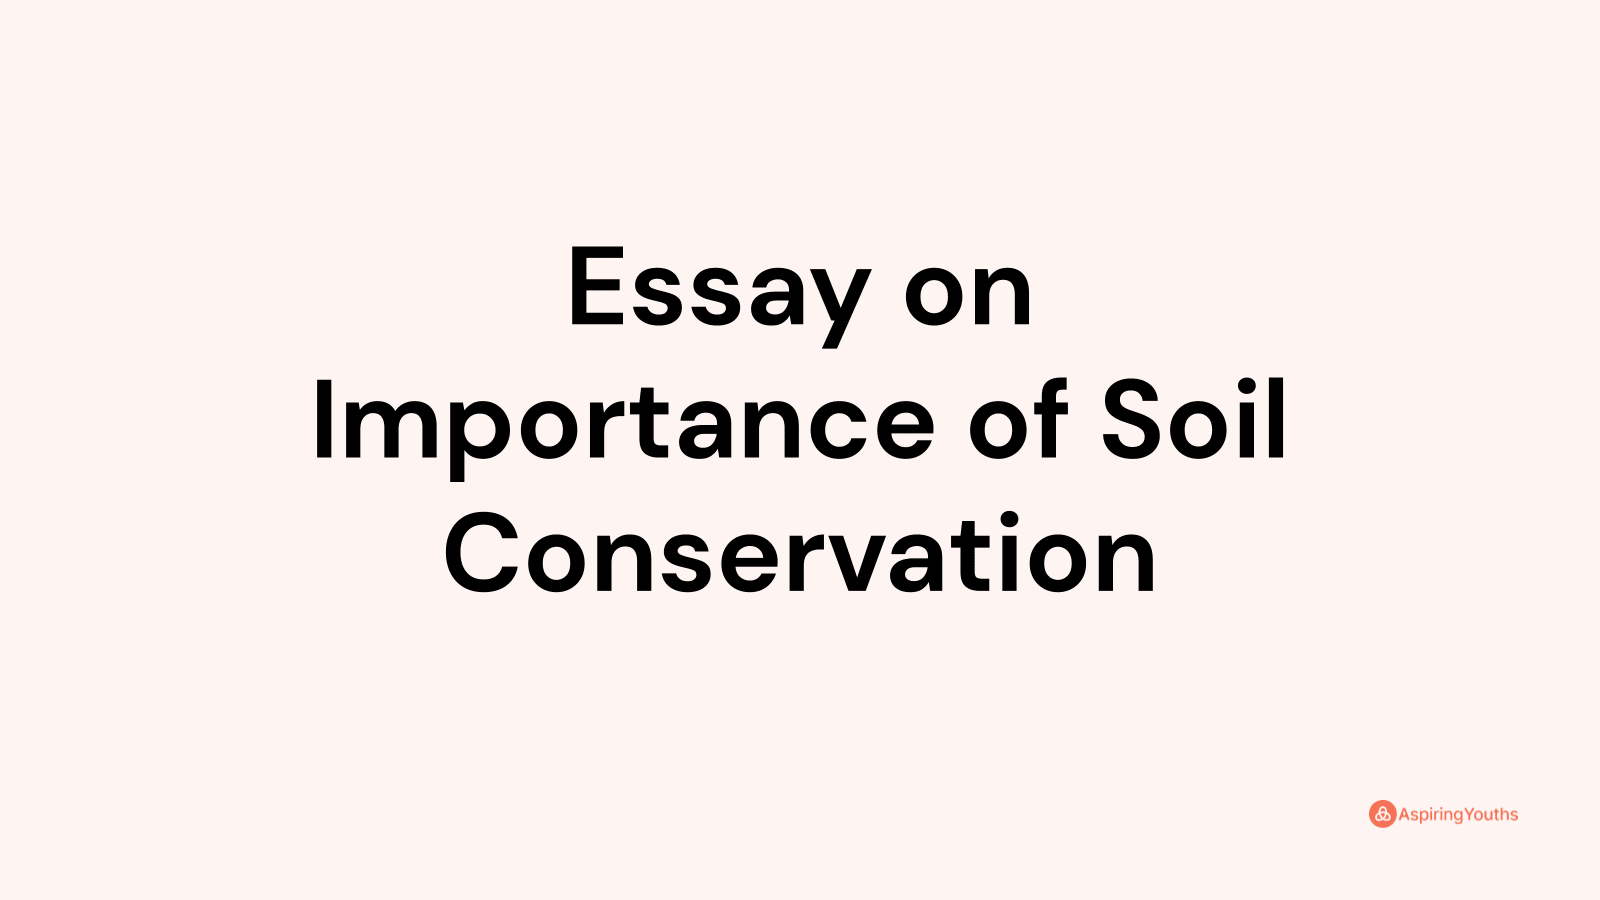 Essay on Importance of Soil Conservation